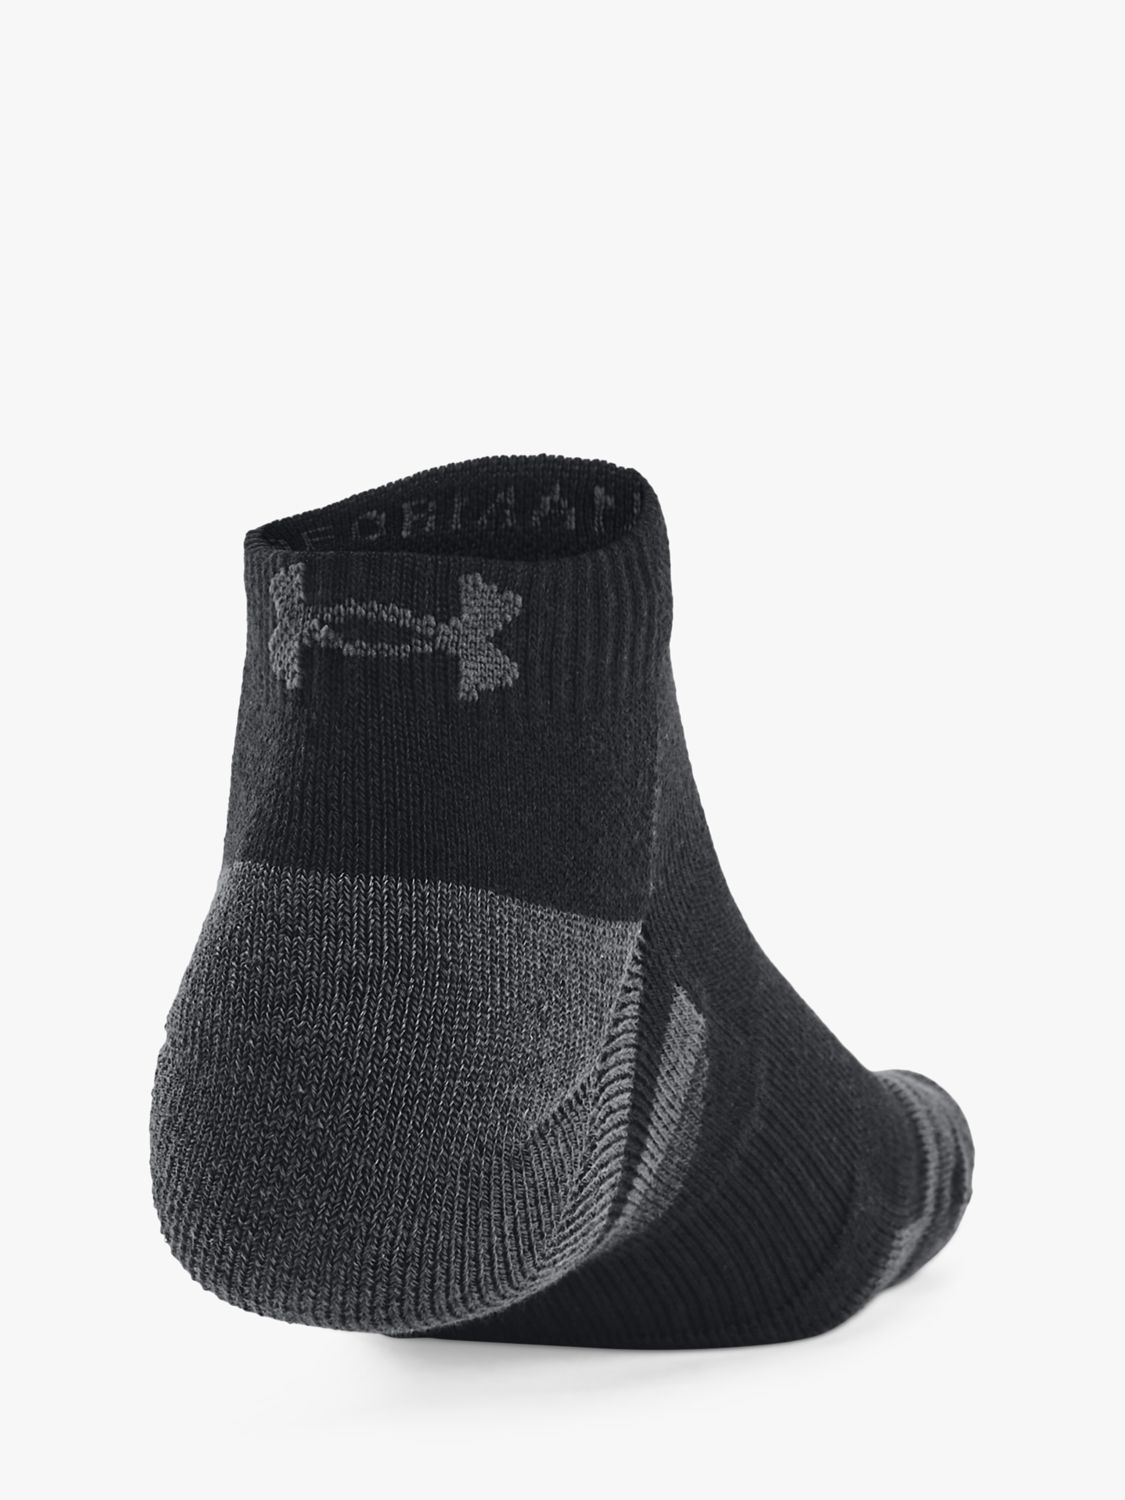 Under Armour Performance Tech Low Cut Socks, Pack of 3, Black/Jet Gray ...